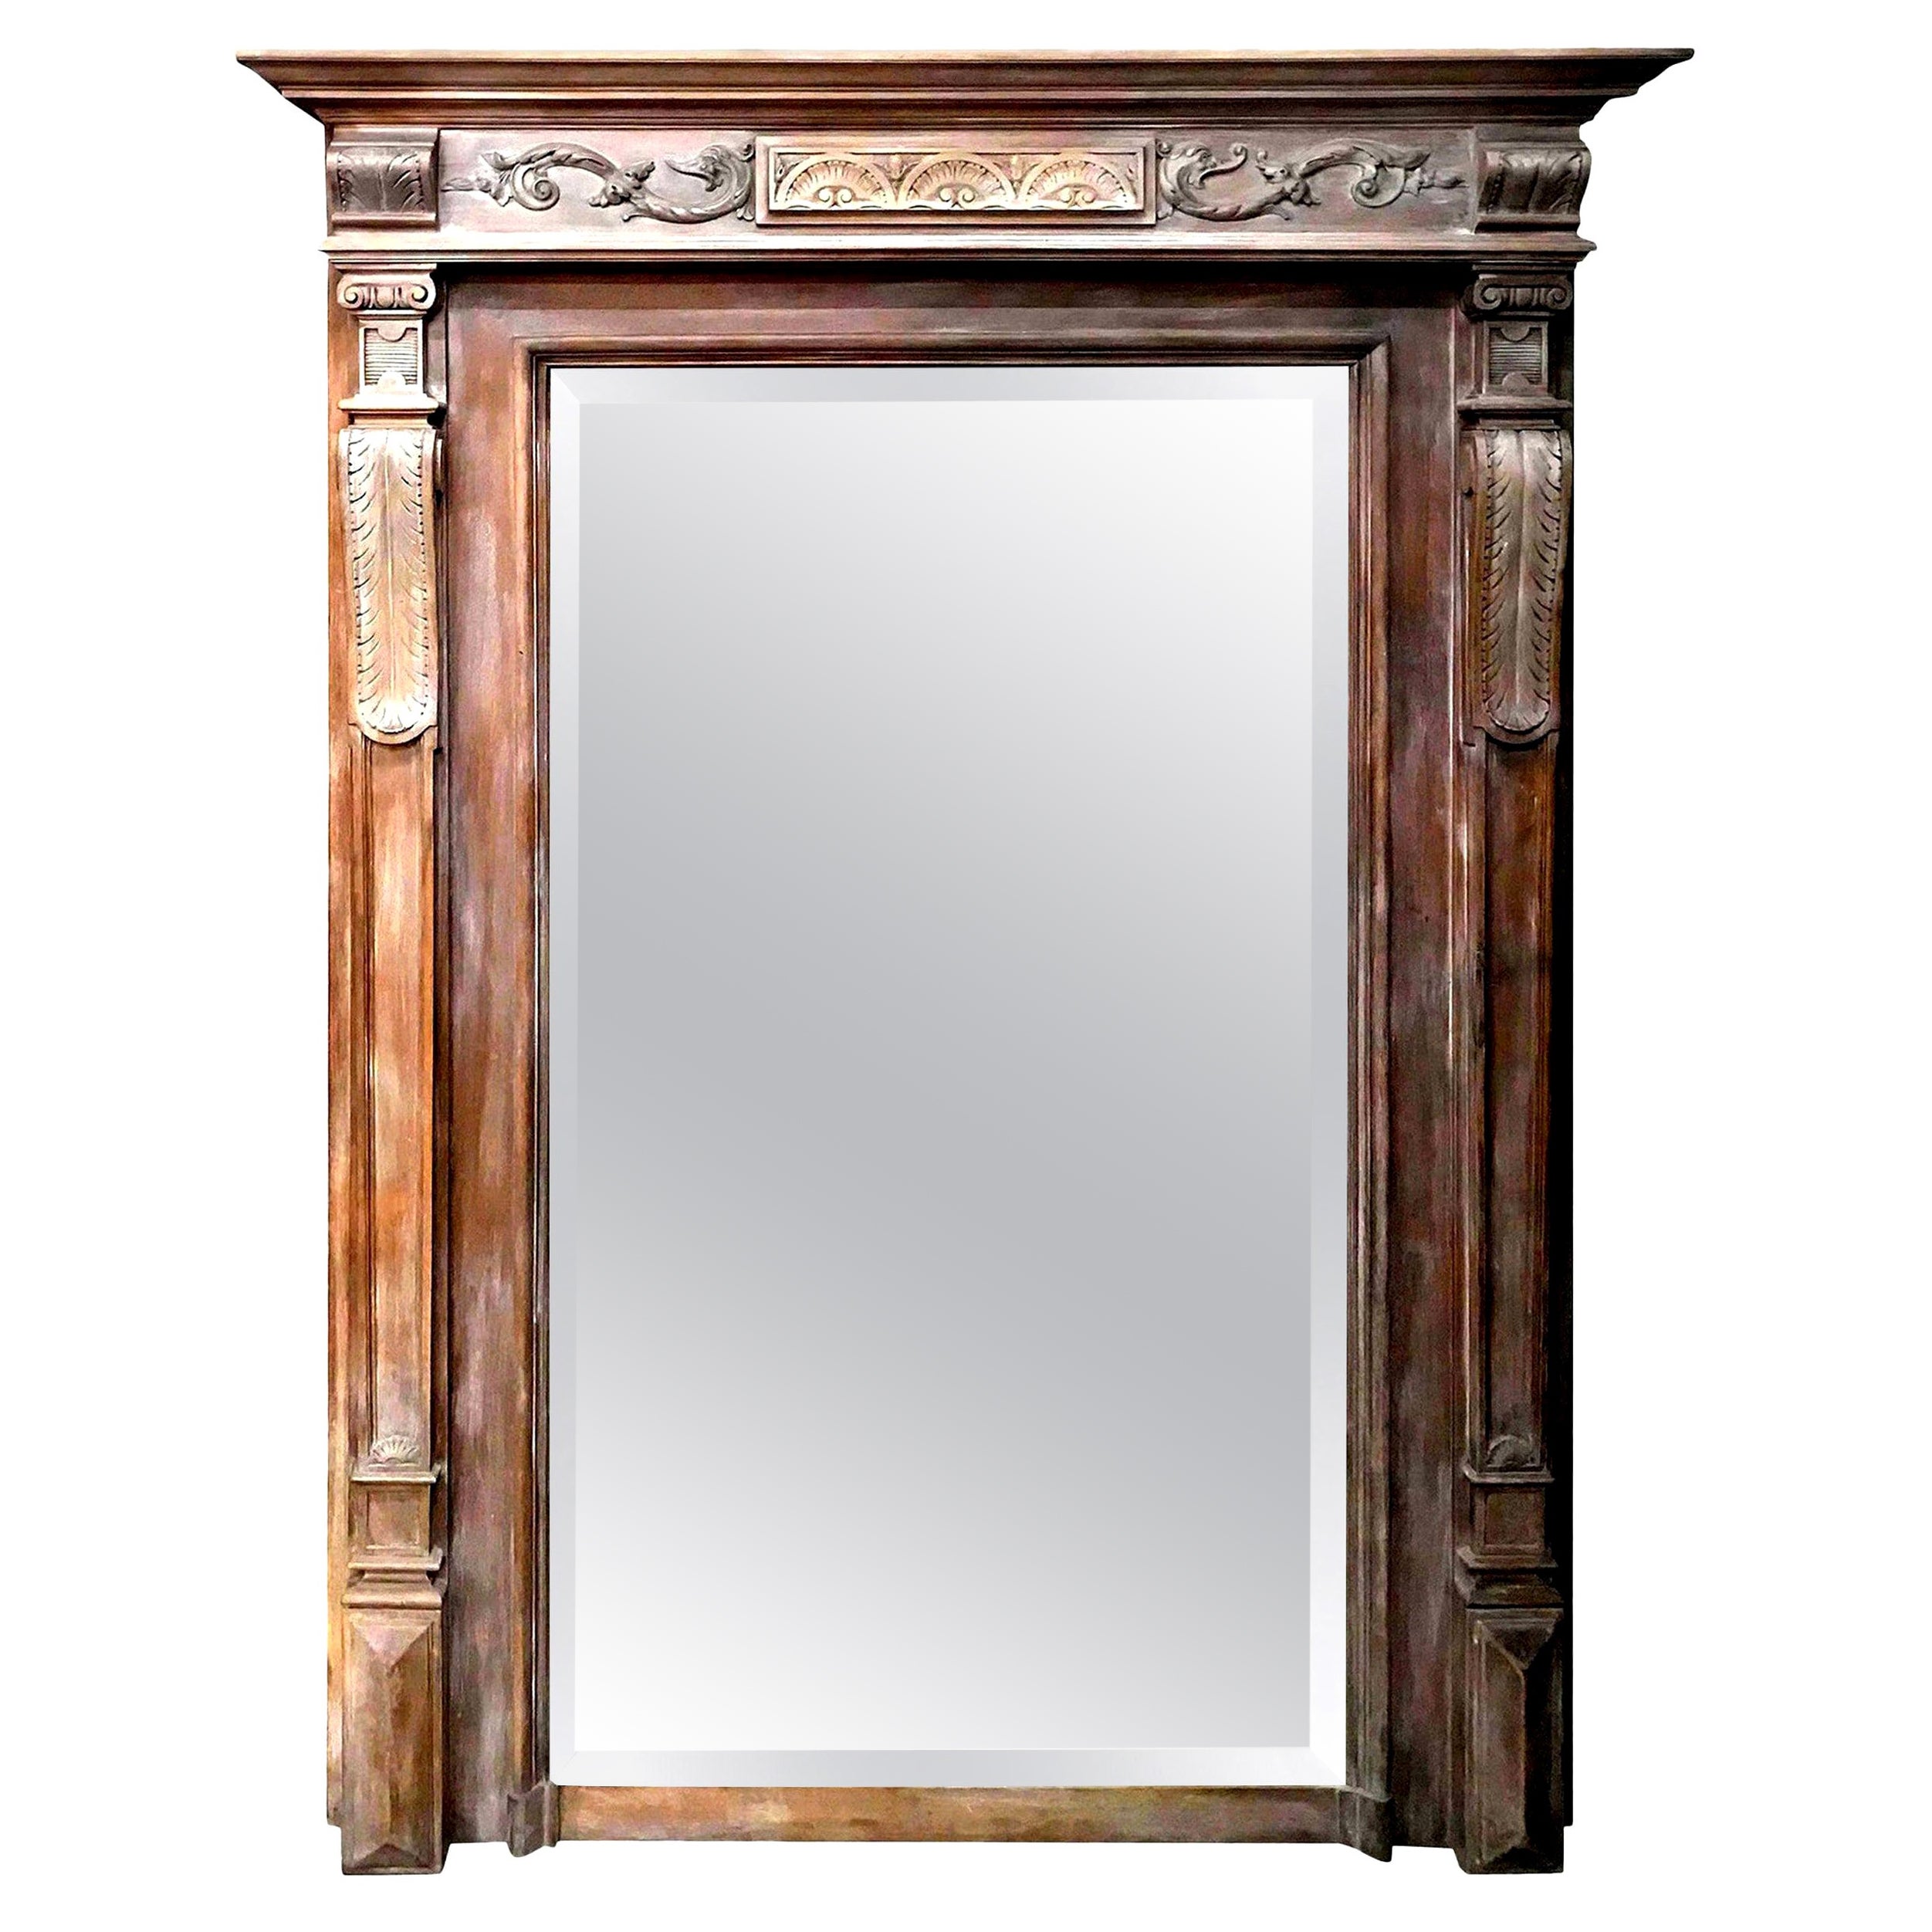 19th Century, French Limed Wood Neoclassical Style Beveled Mirror For Sale